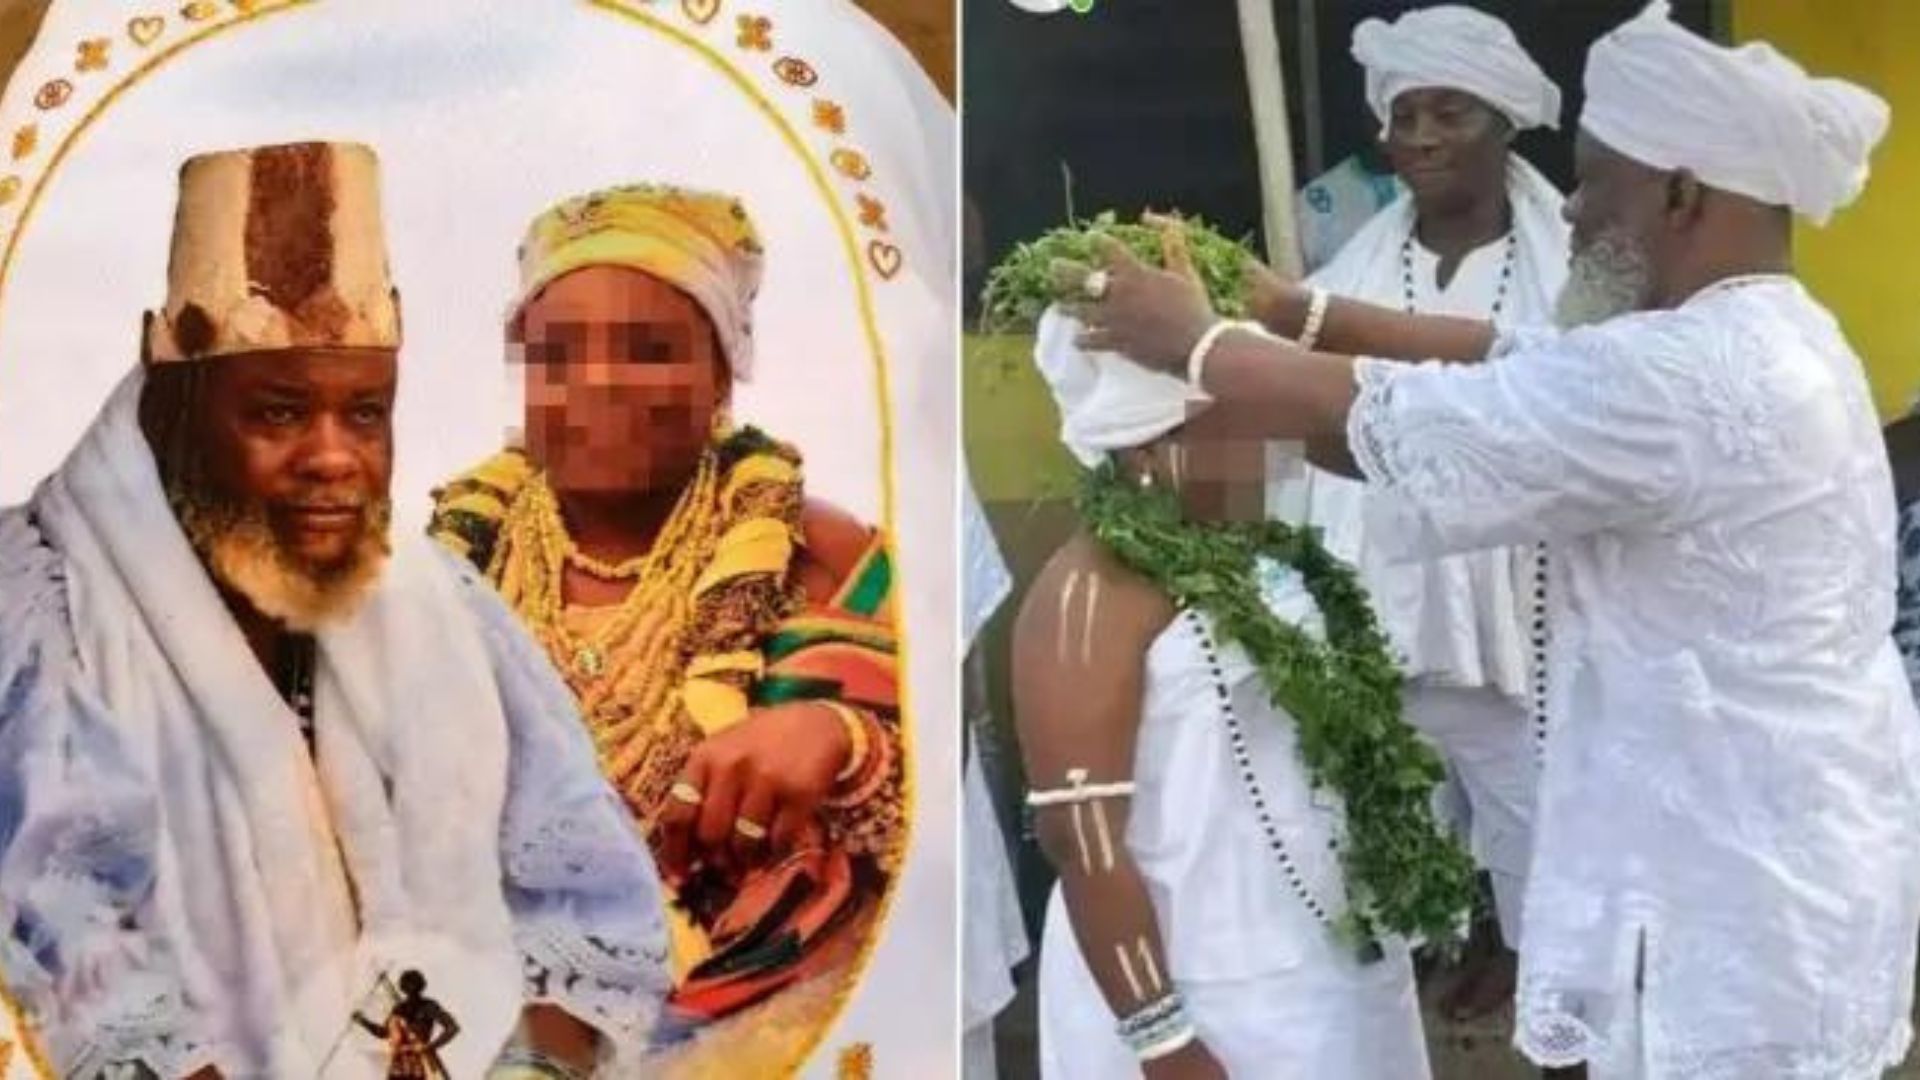 Outrage Ensues Over Marriage of 63-Year-Old Priest to 12-Year-Old in Ghana